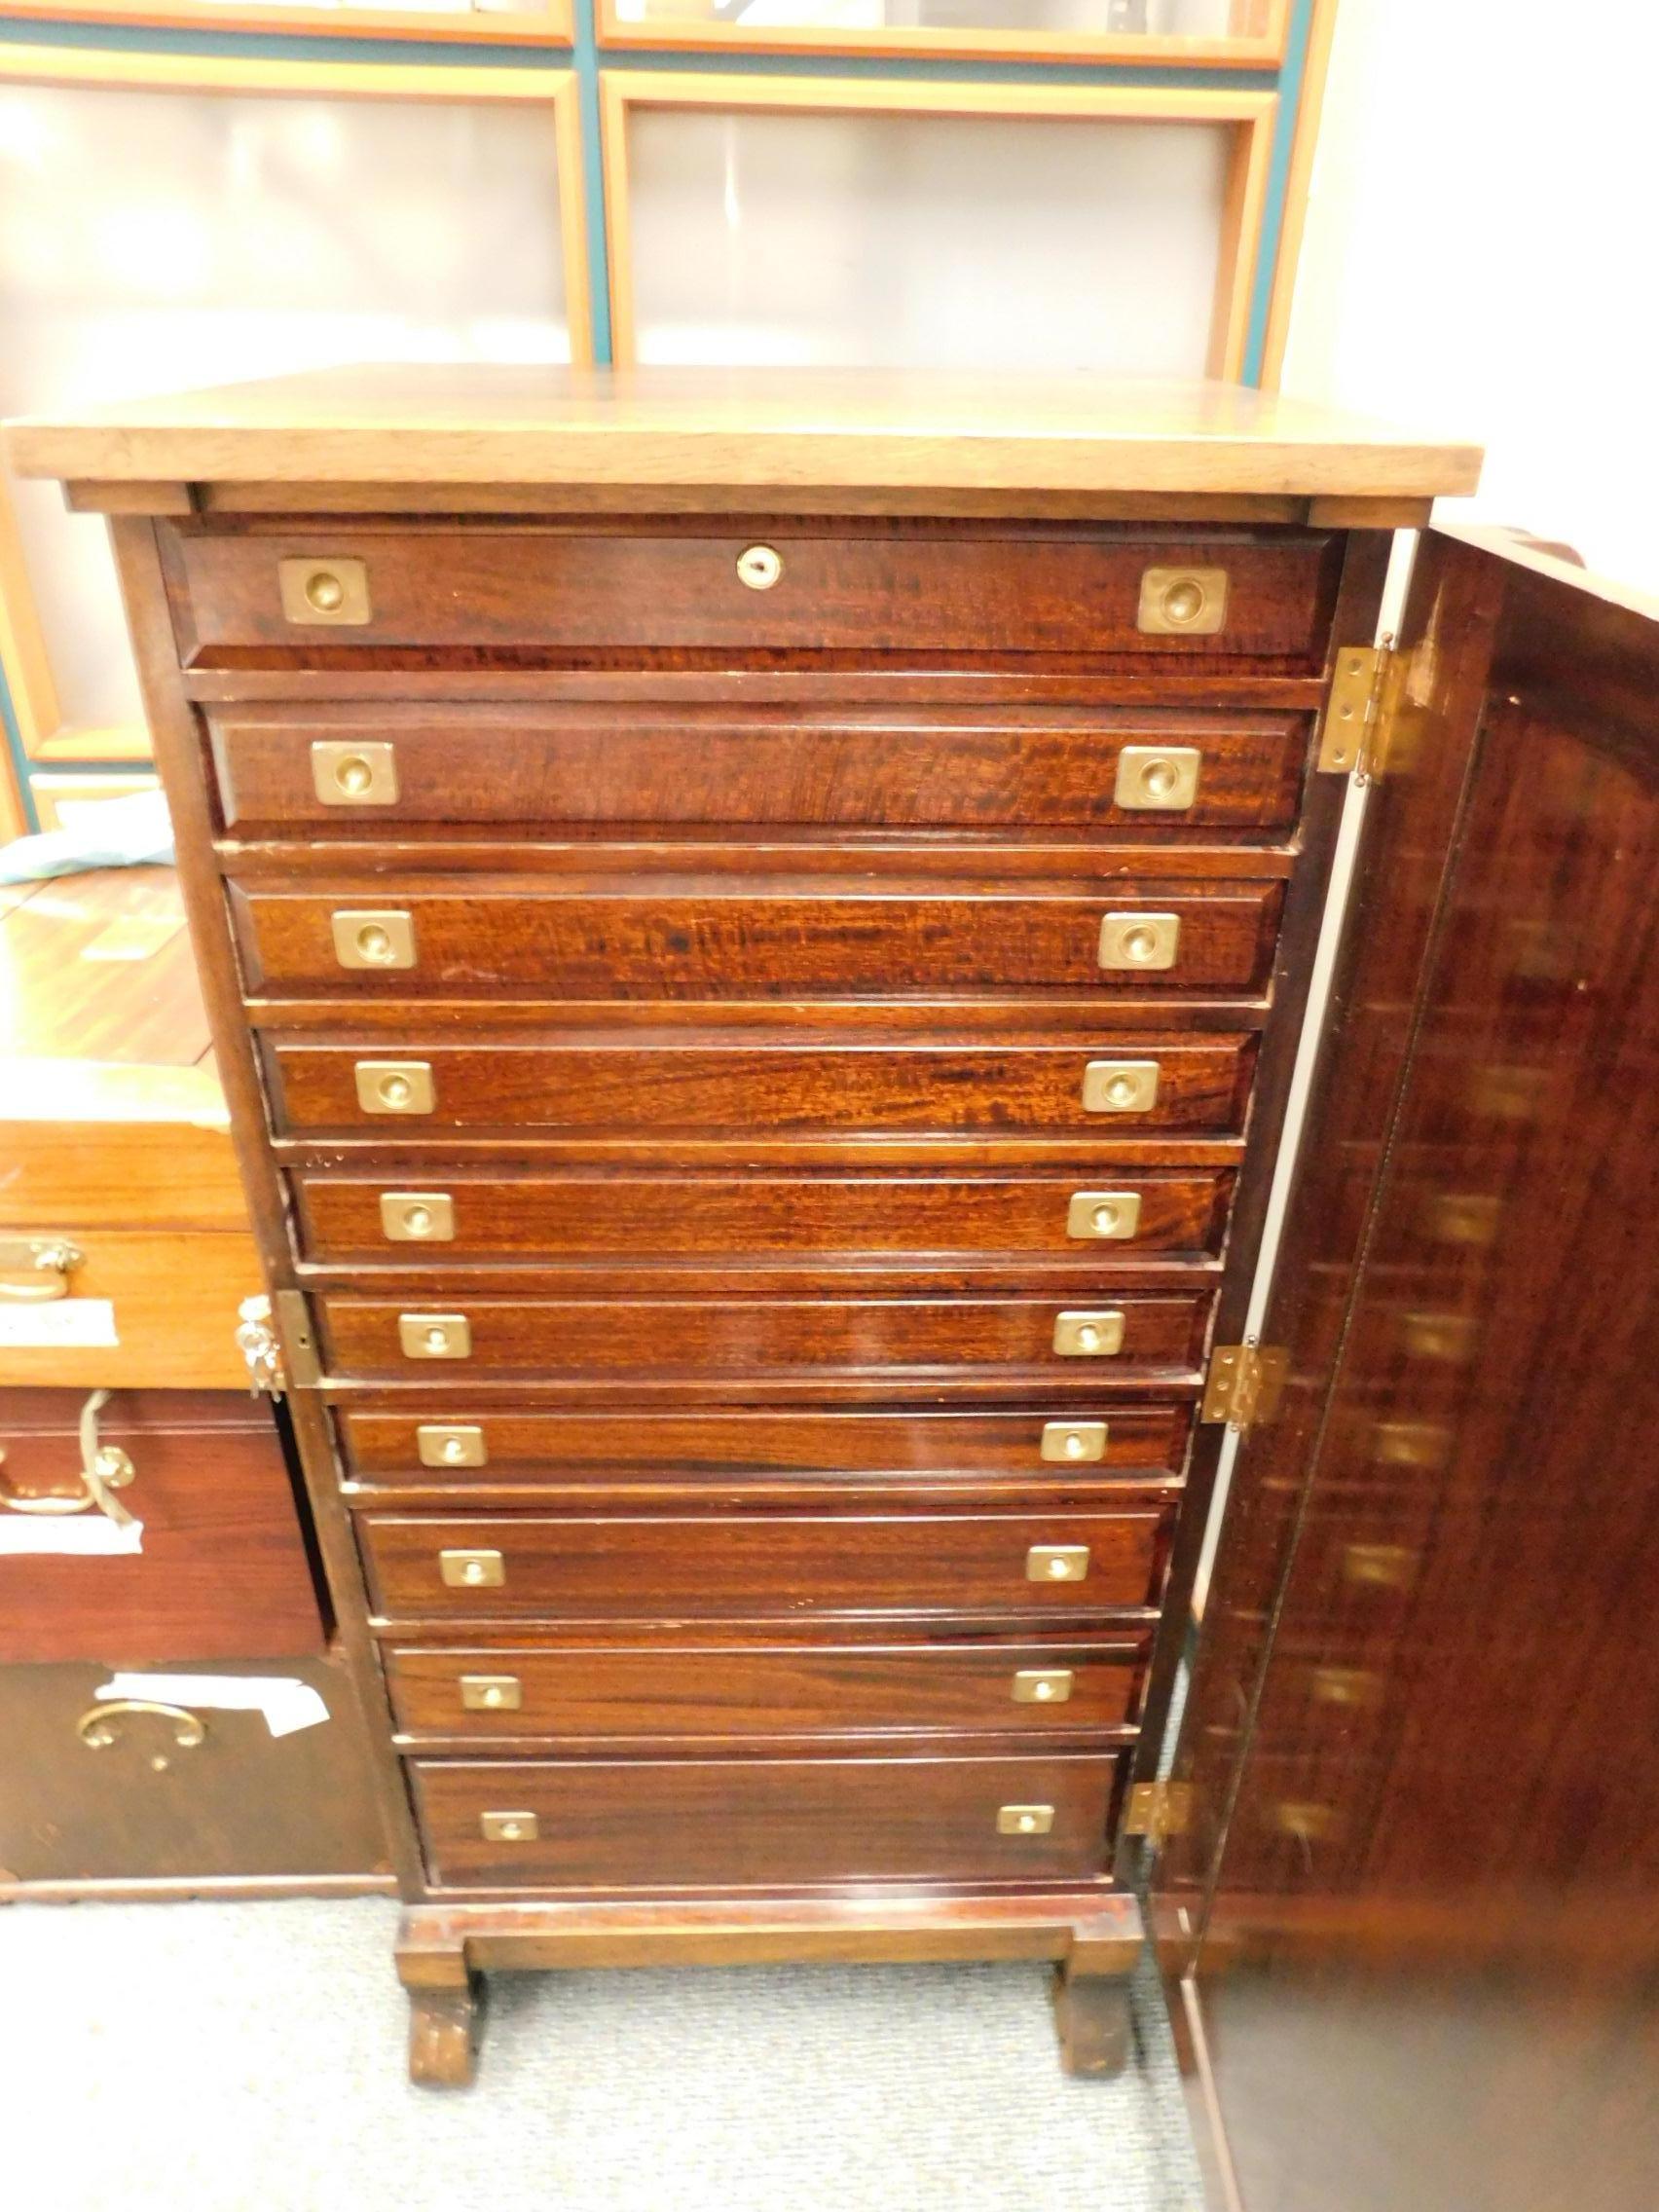 Provenance: This set was owned by then president of the Historic Broadmoor Resort, Charles L. Tutt II, for his home in Colorado Springs. That home was given to the Colorado College and is currently the Tutt Alumni House. The impressive 10 drawer